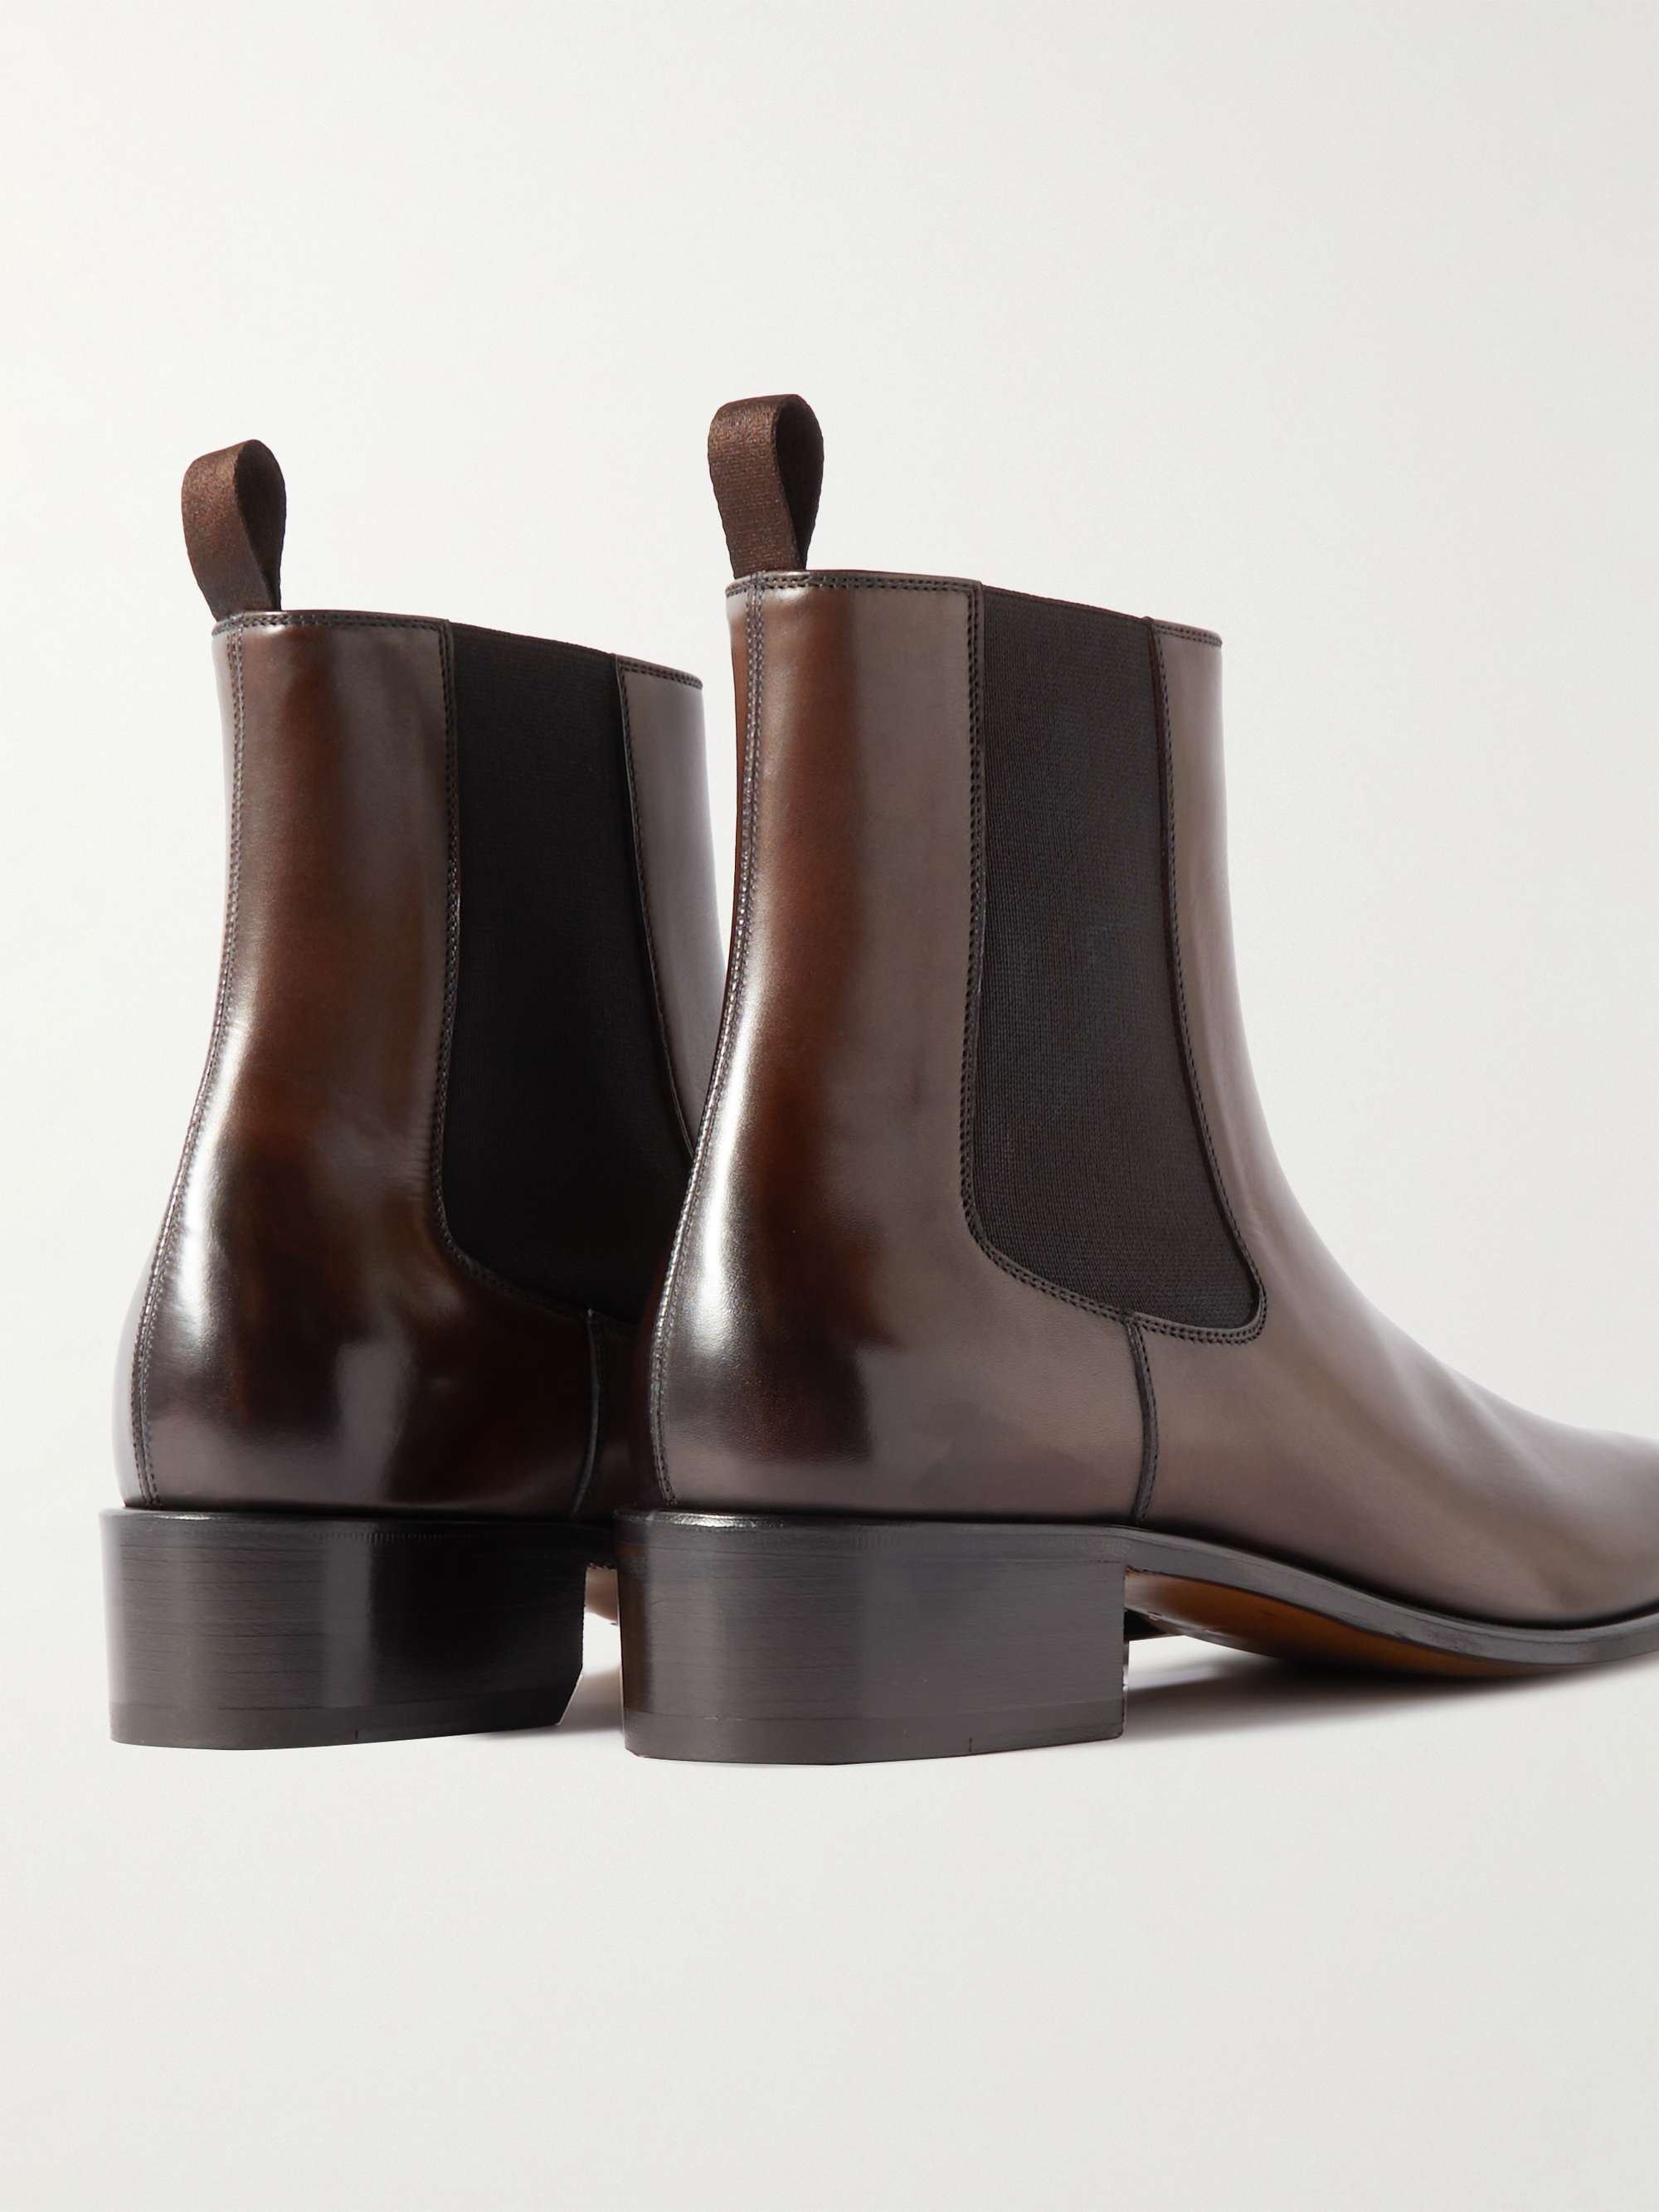 TOM FORD Alec Patent-Leather Chelsea Boots